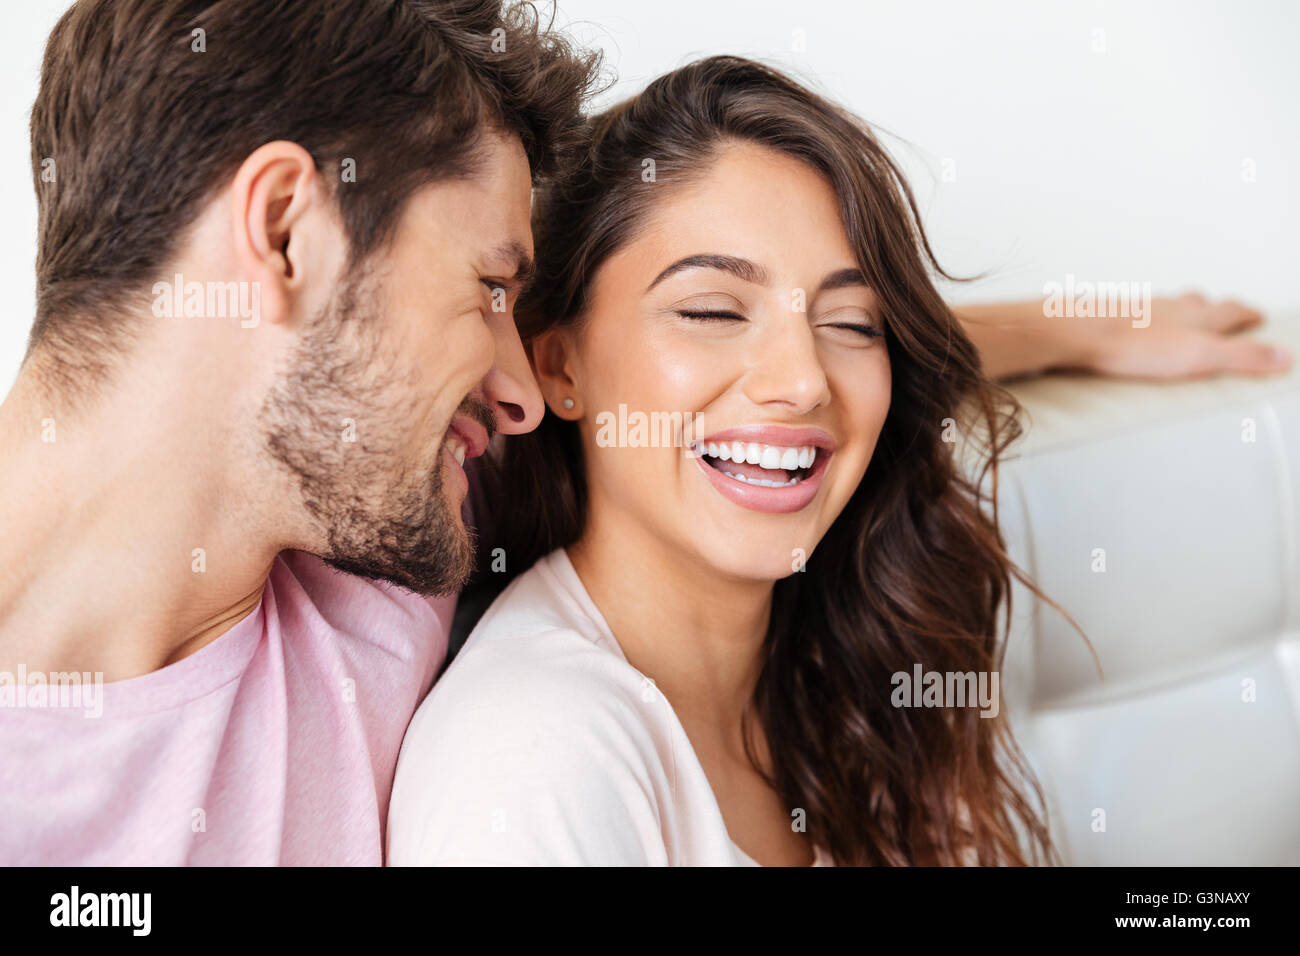 Close-up portrait of smiling young couple sitting on the couch isolé sur fond blanc Banque D'Images